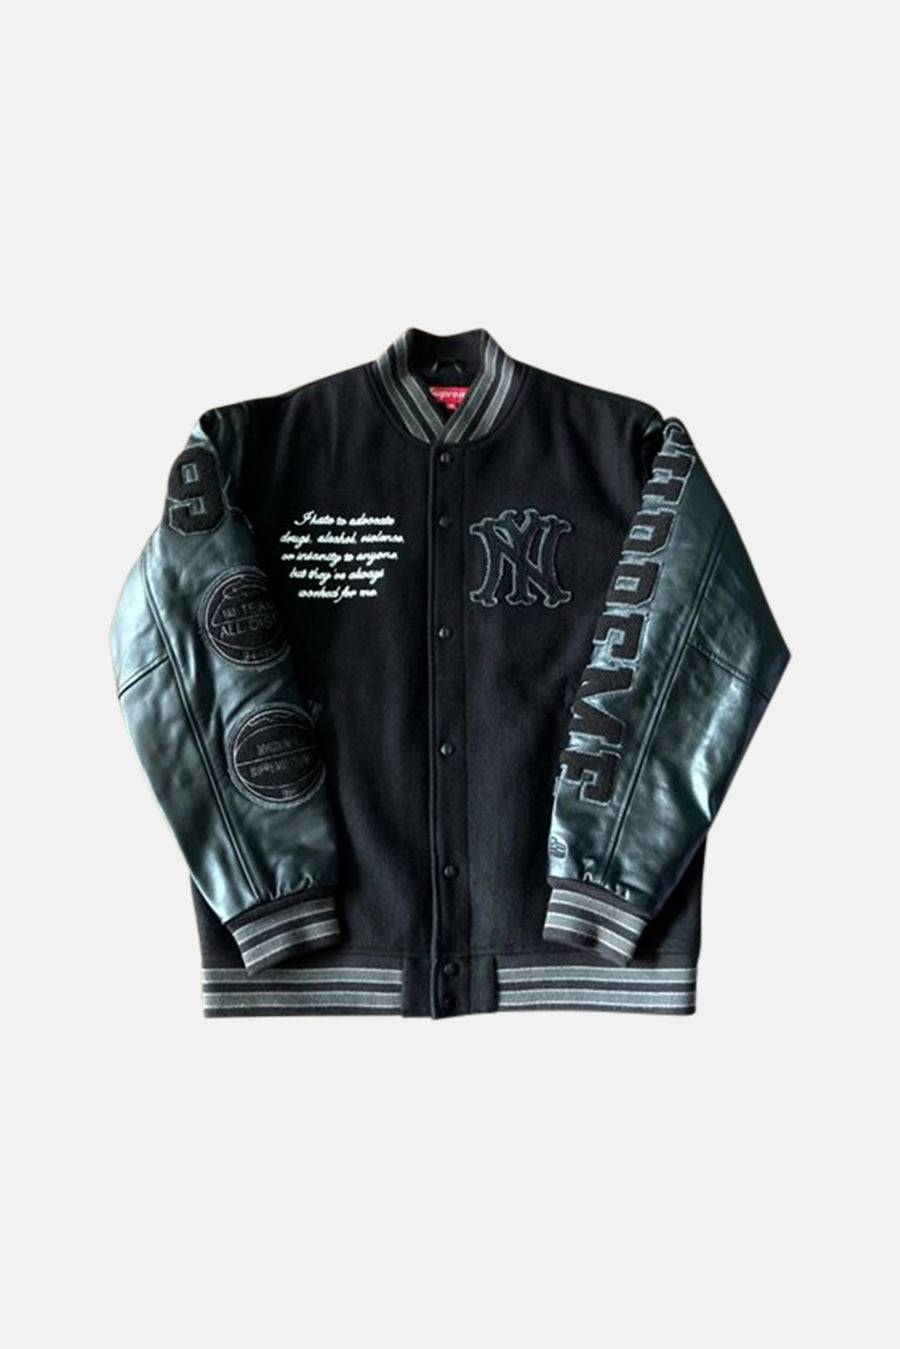 Supreme Woven Leather Varsity Jacket in Black, Size Small - Outerwear